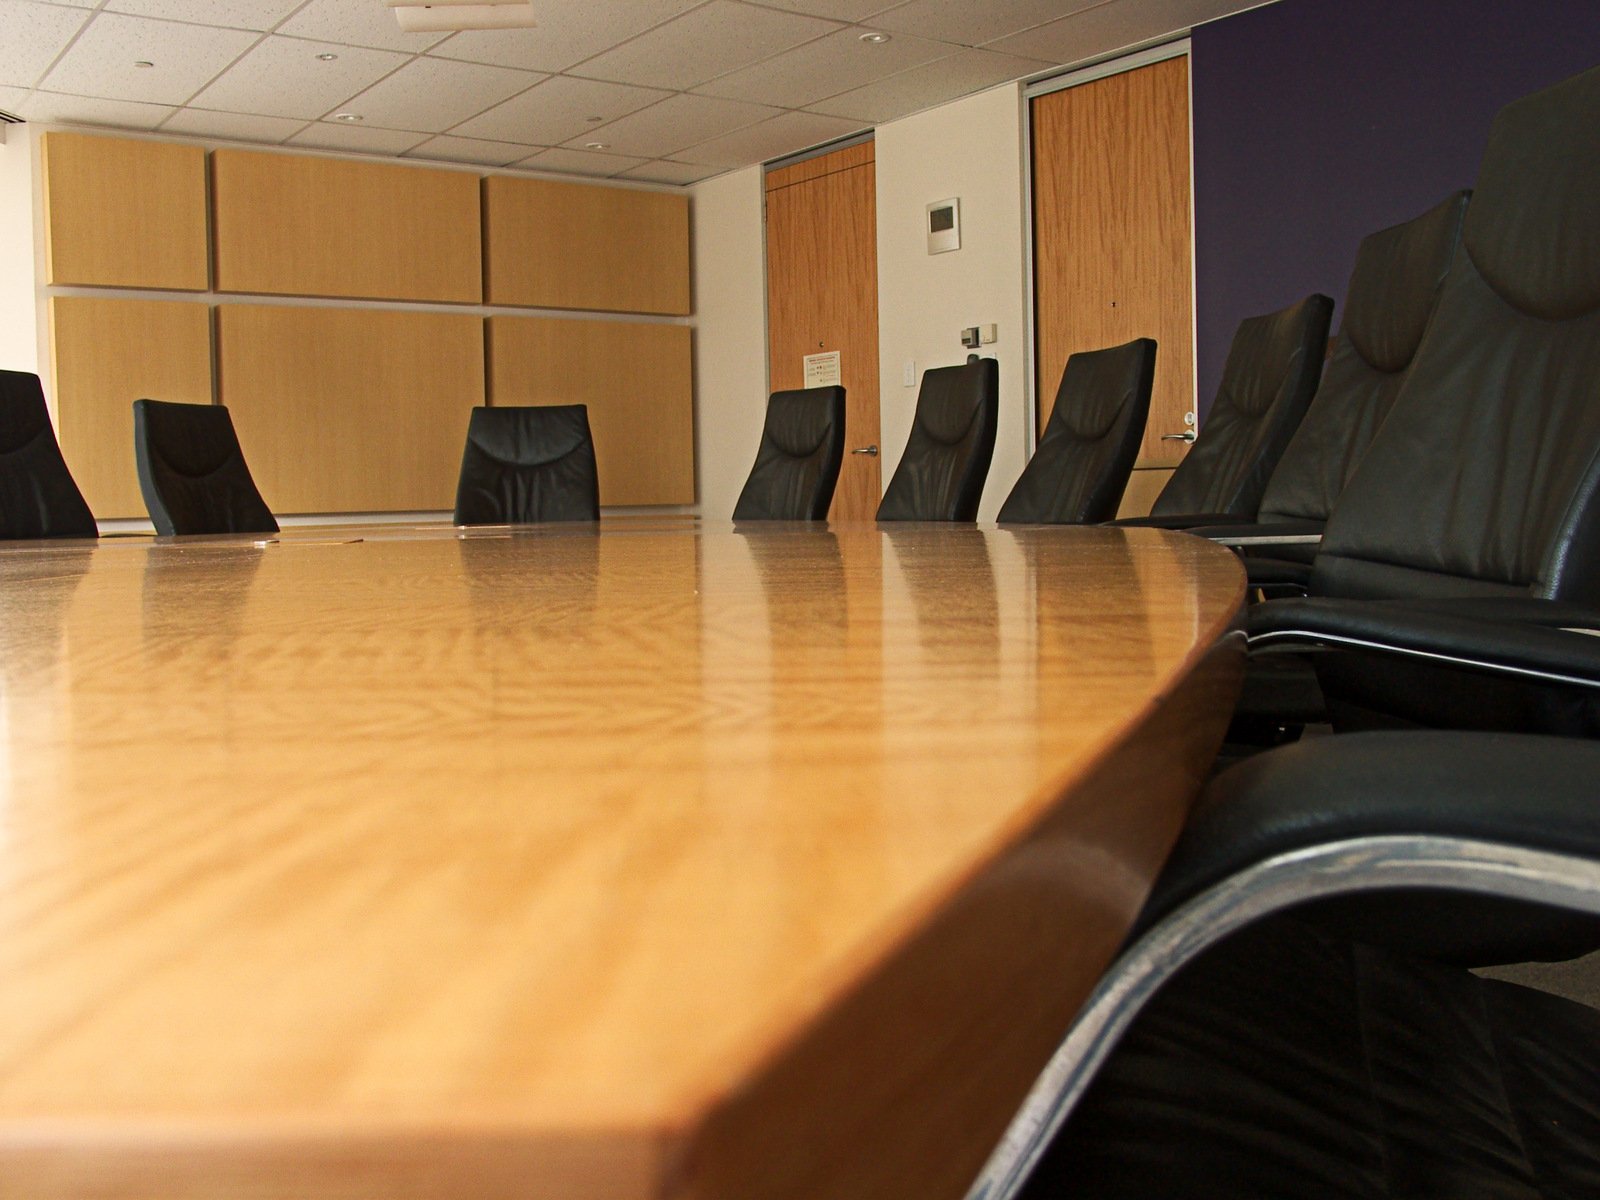 A boardroom revisited